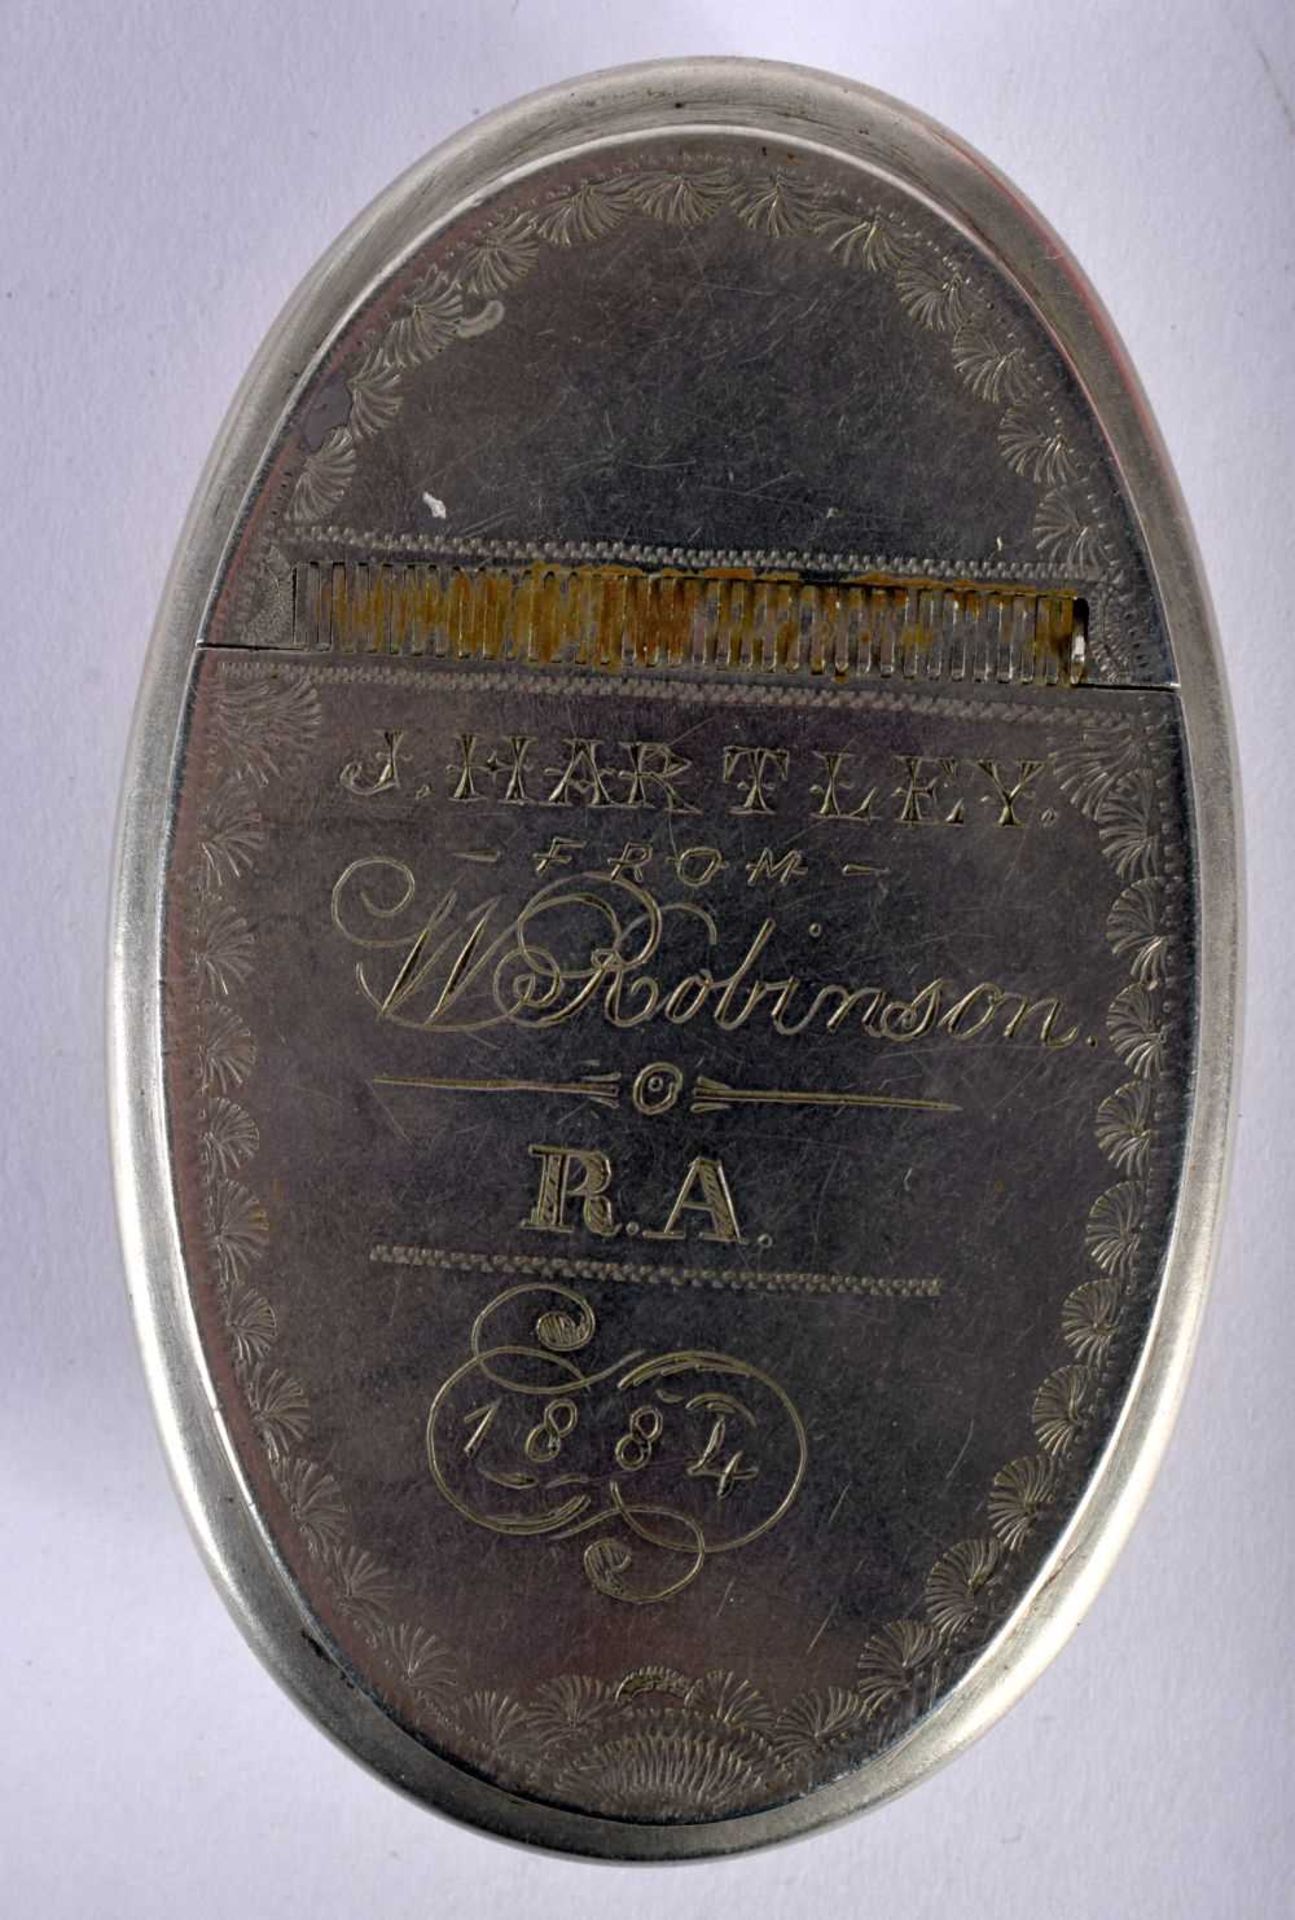 Antique 1884 Curved Metal Pocket Snuff Box With Etched Engraving "J Hartley from W Robinson RA 1884,